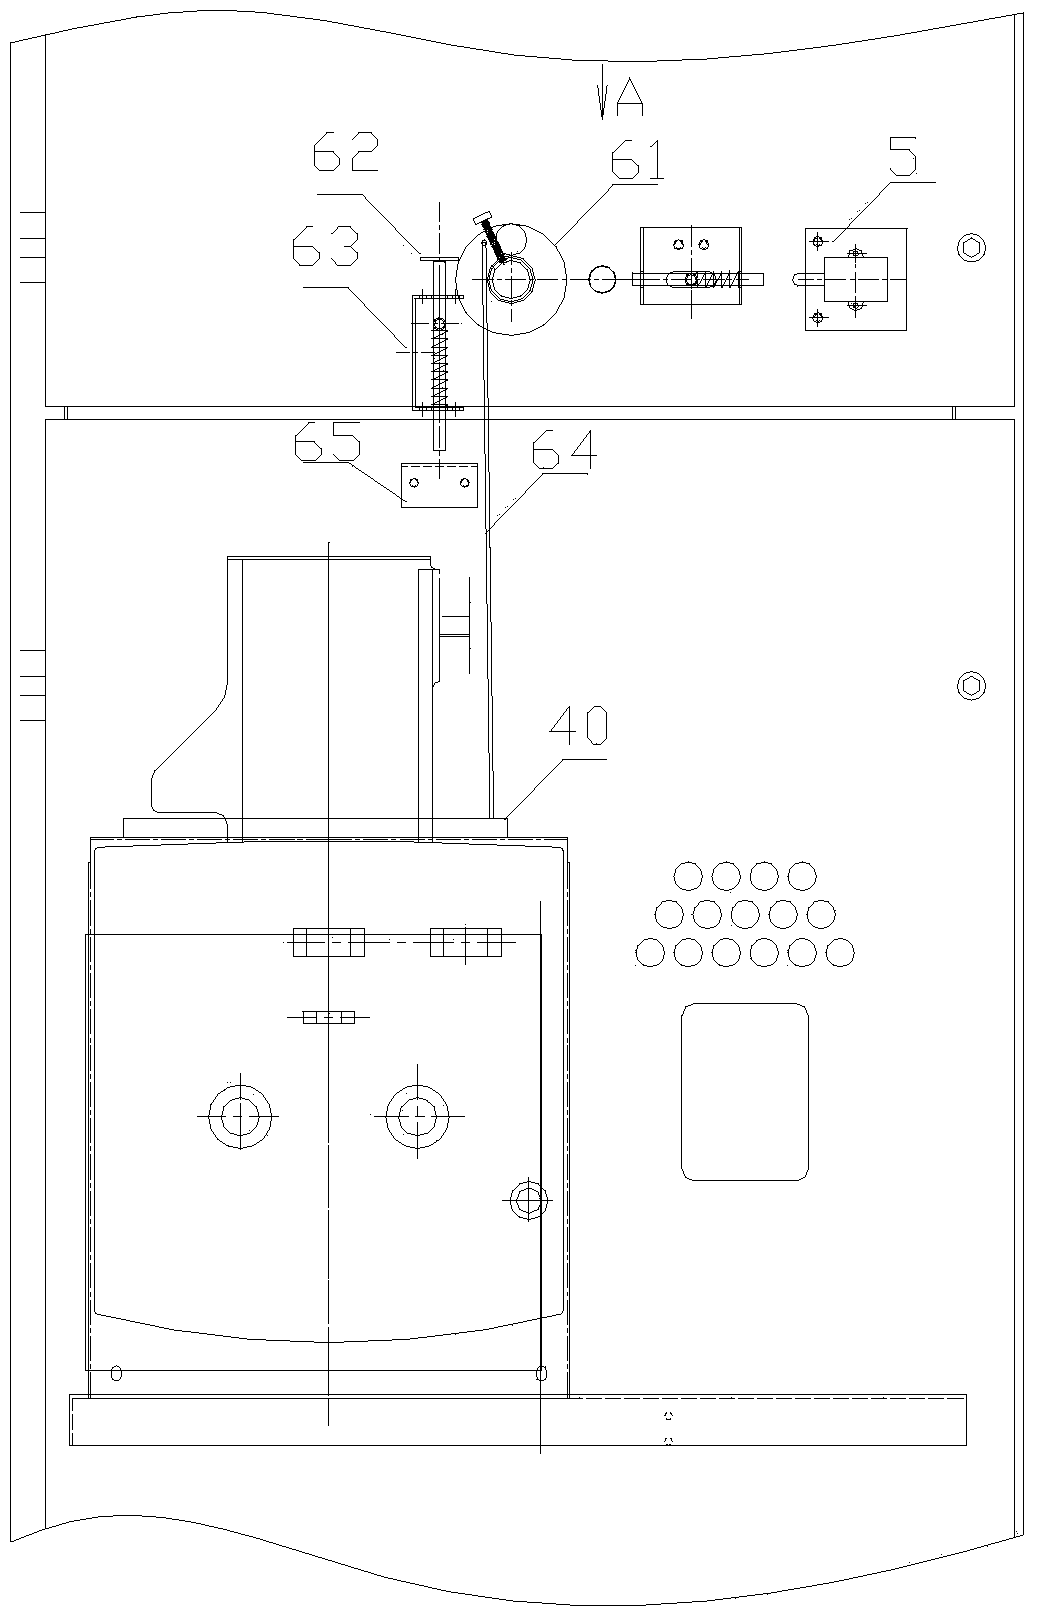 Disconnecting switch and interlocking mechanism of circuit breaker